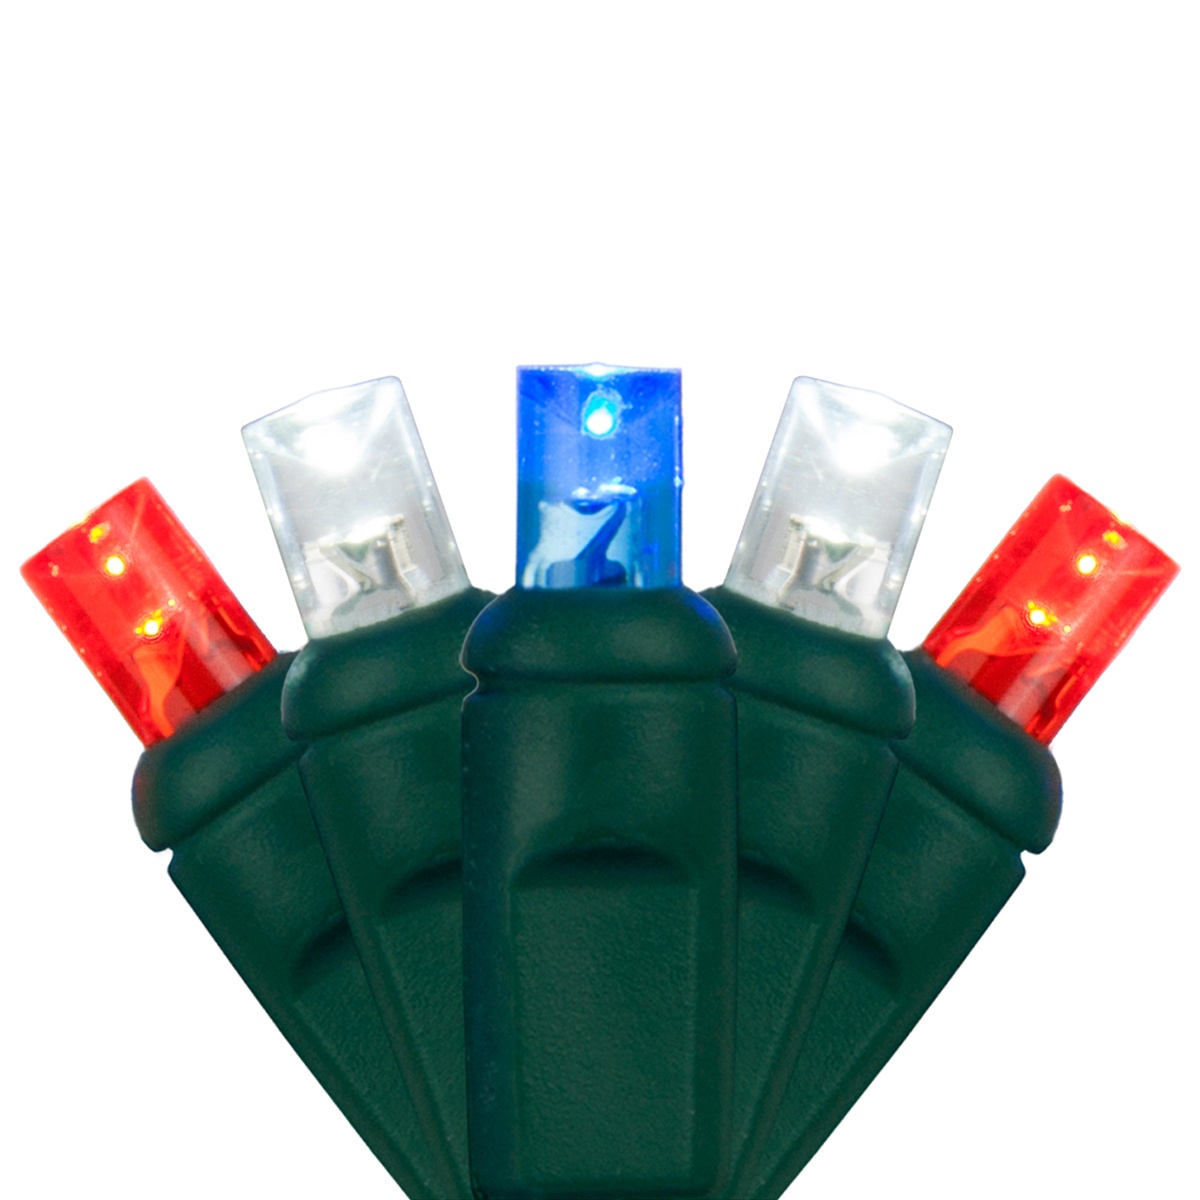 5mm Wide Angle Red, White and Blue LED Christmas Lights on Green Wire -  Wintergreen Corporation